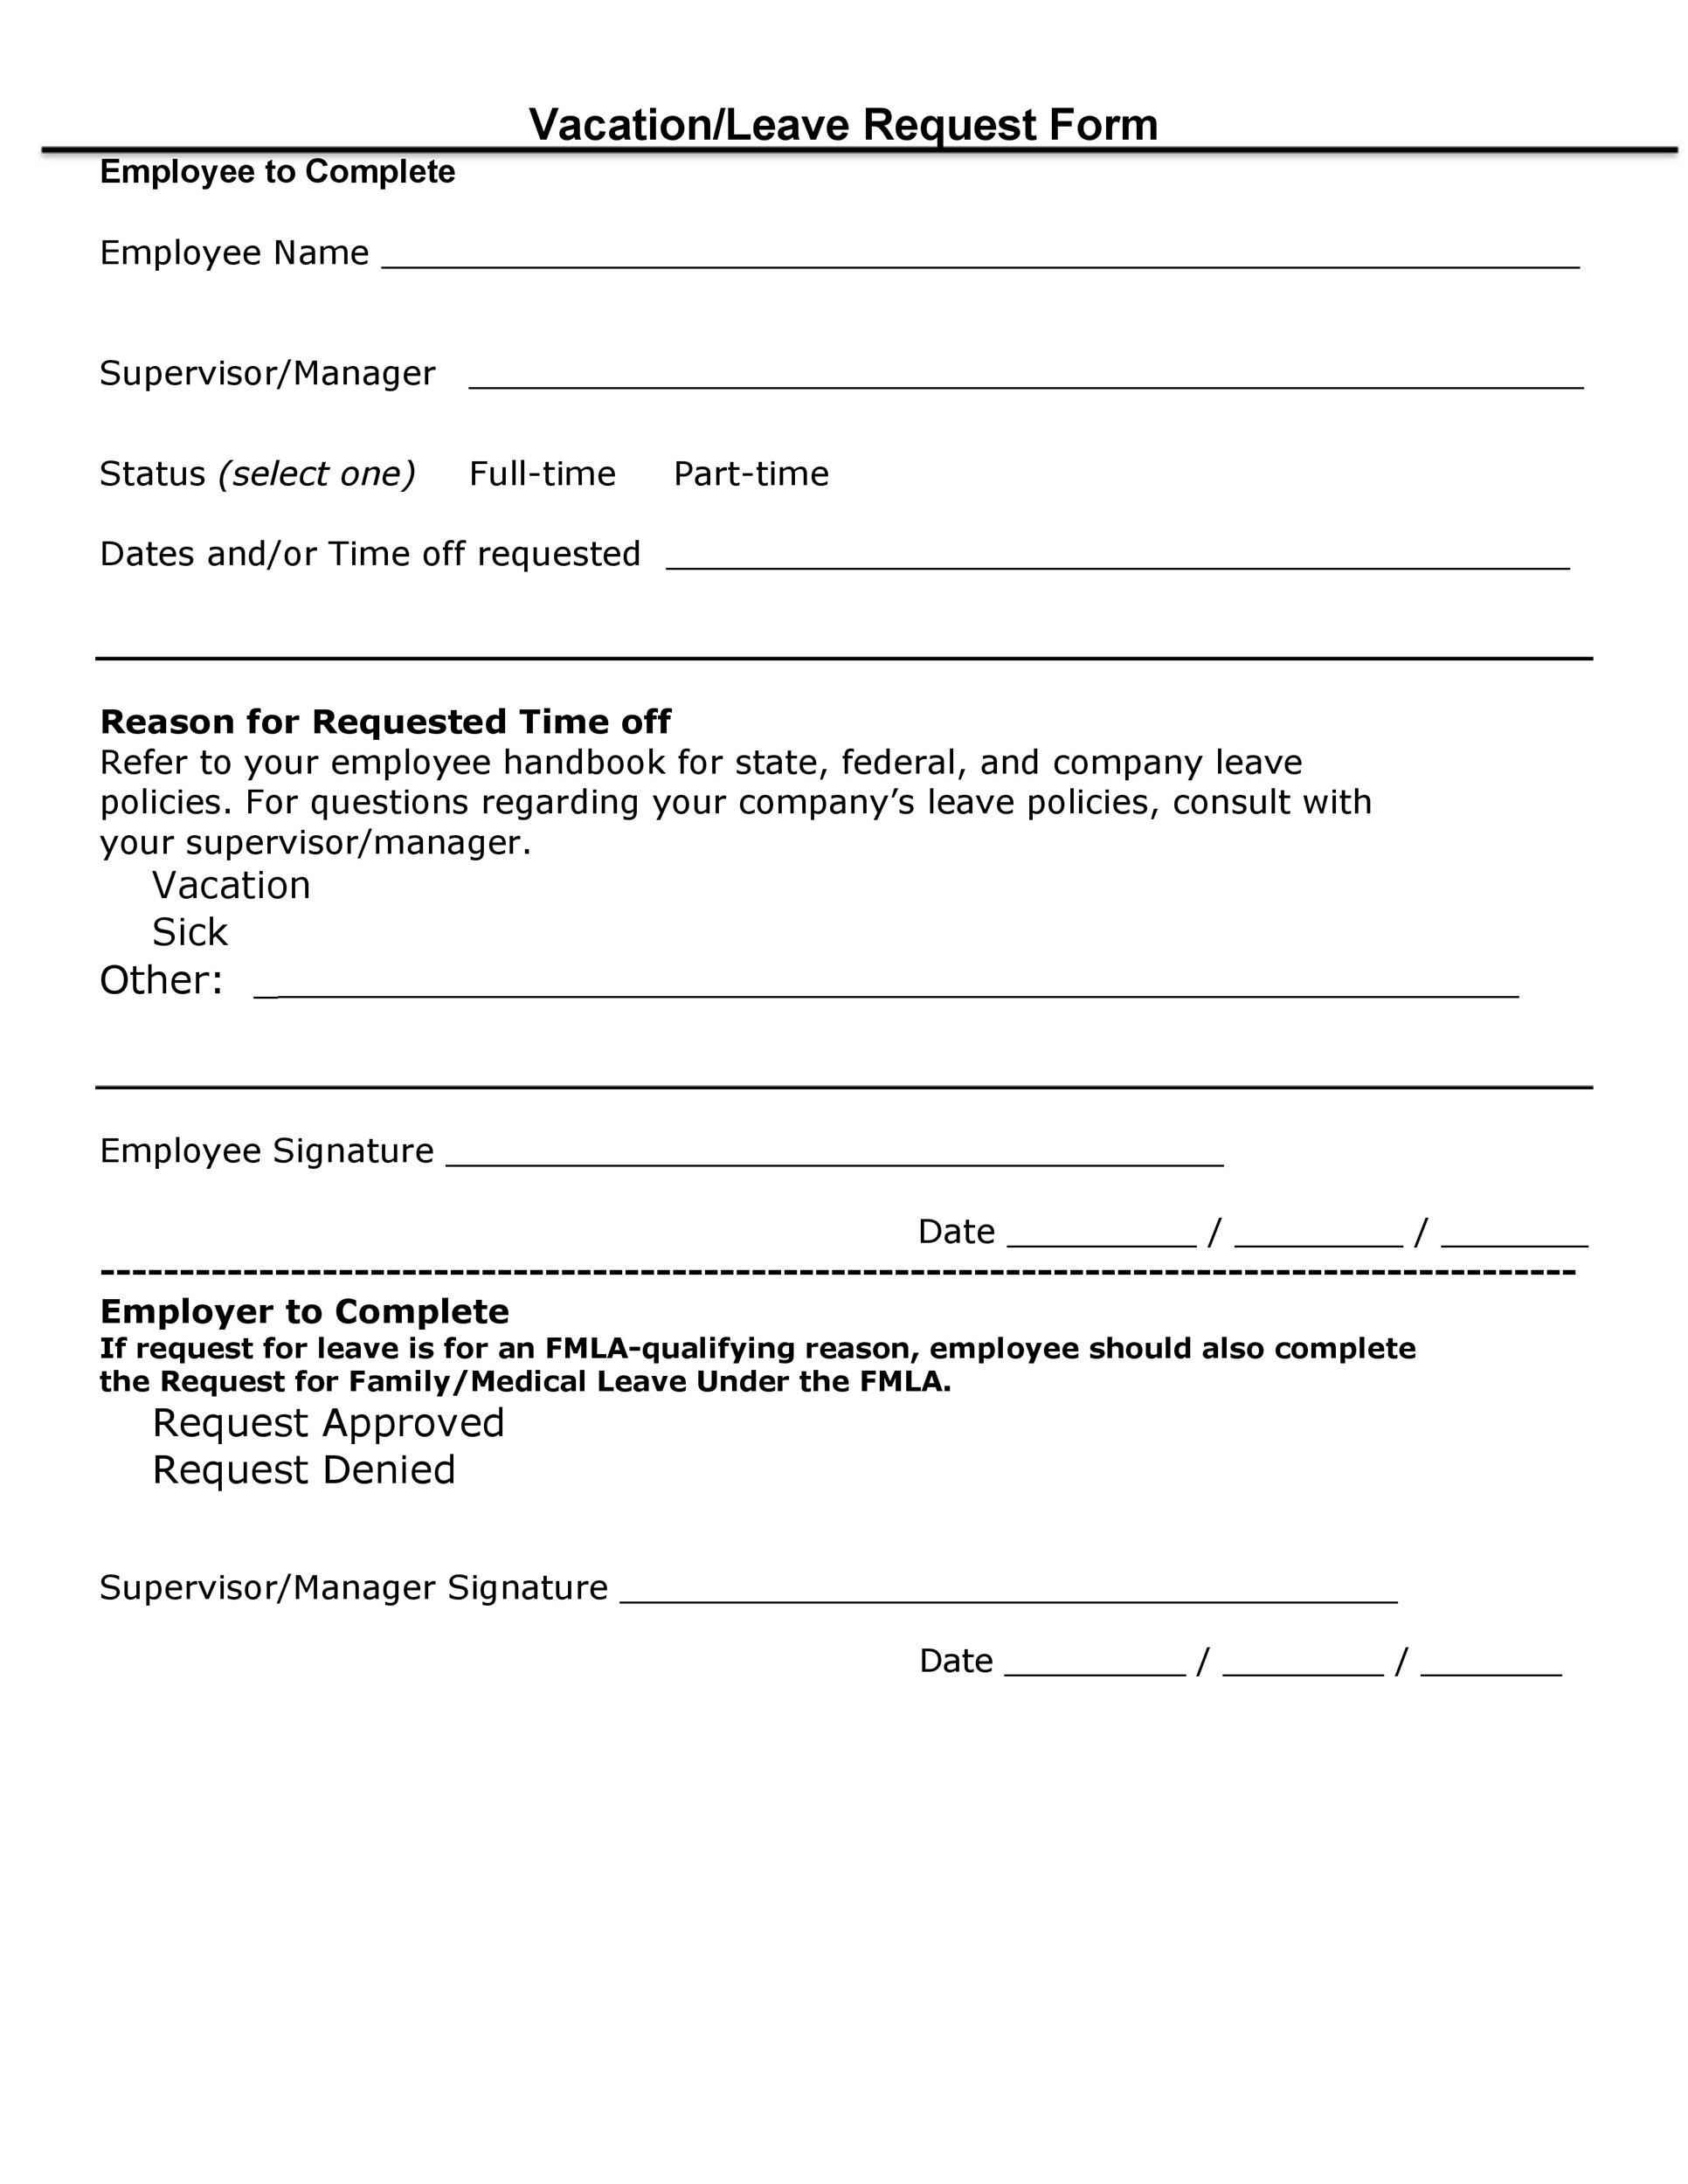 Free vacation request form 46